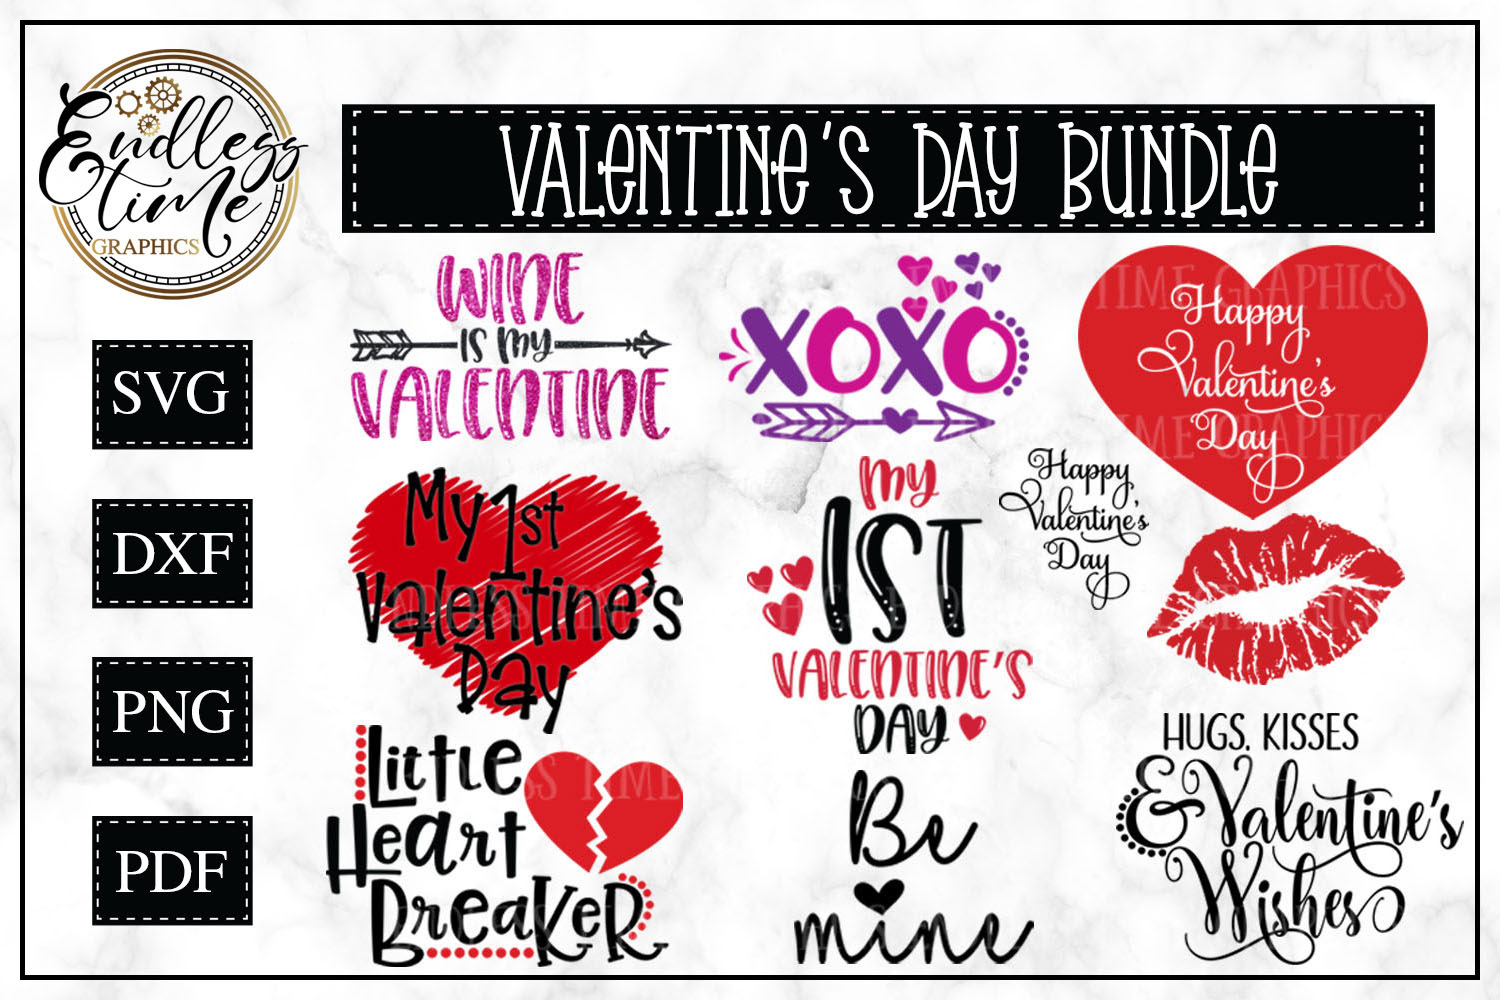 Download Endless Time Graphics Valentine S Day Bundle Vol 1